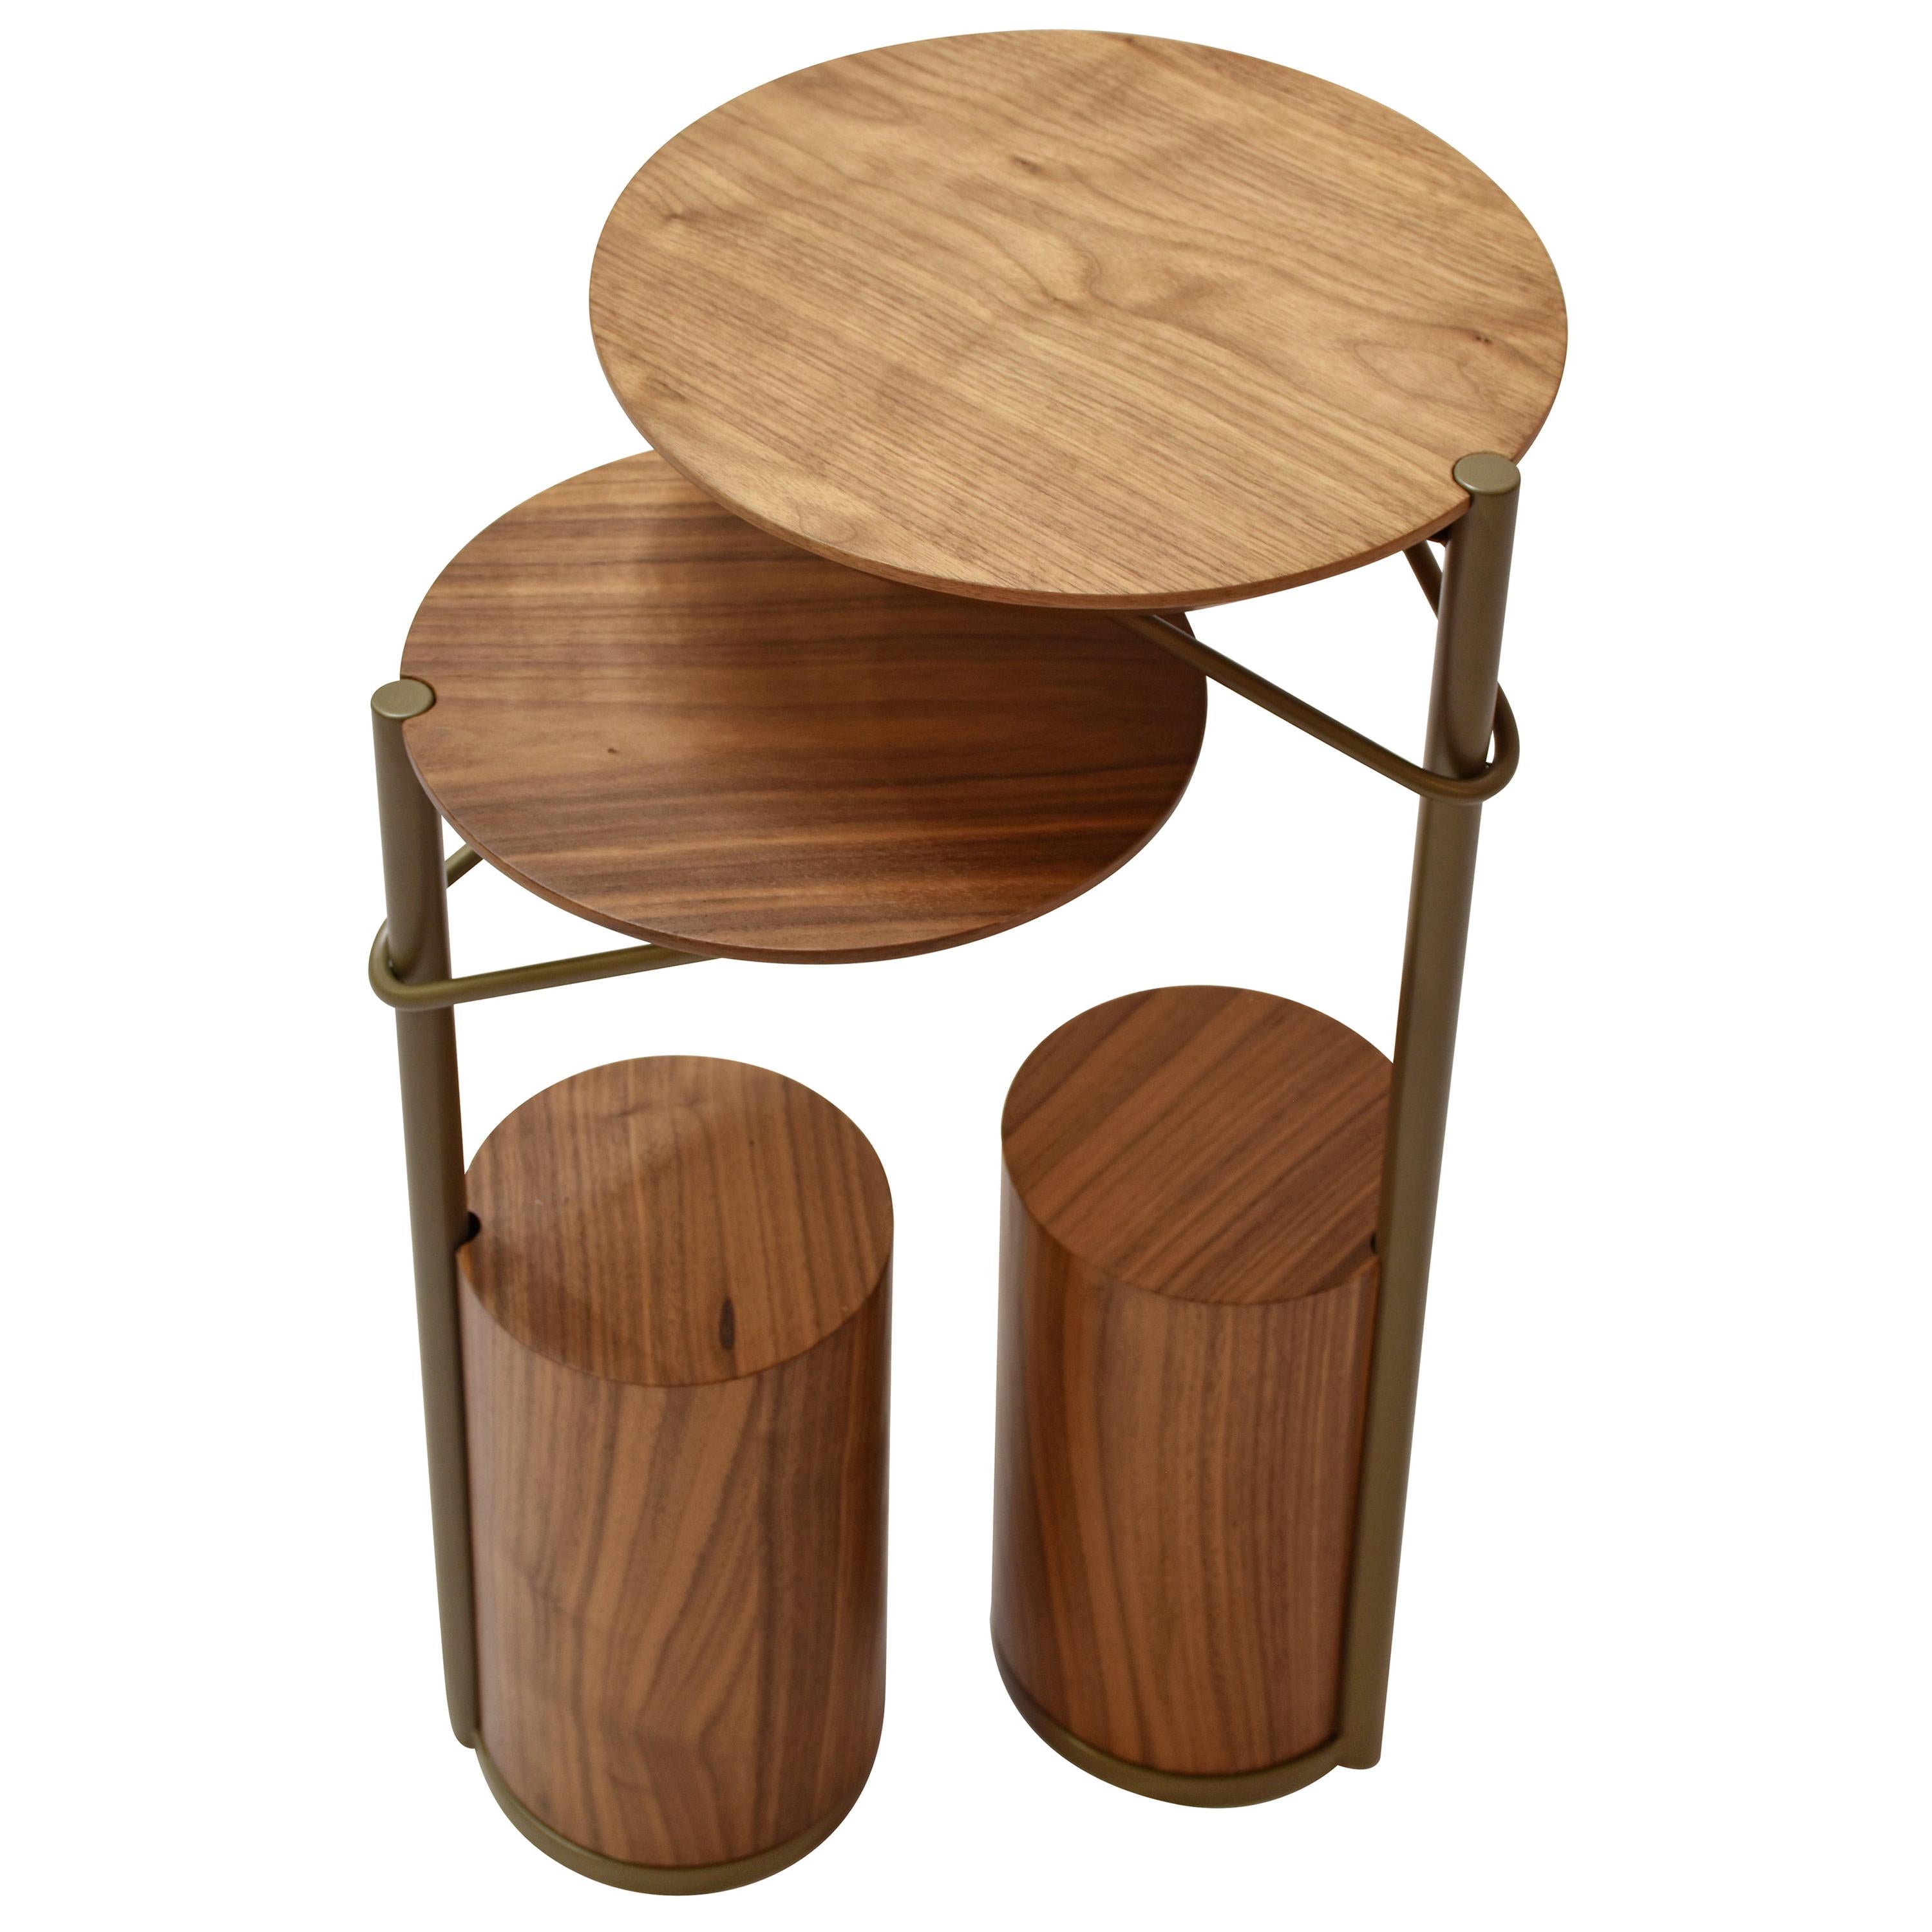 "Tyr" Side Table Set in Walnut Natural Wood Blade and Metal Brass Color